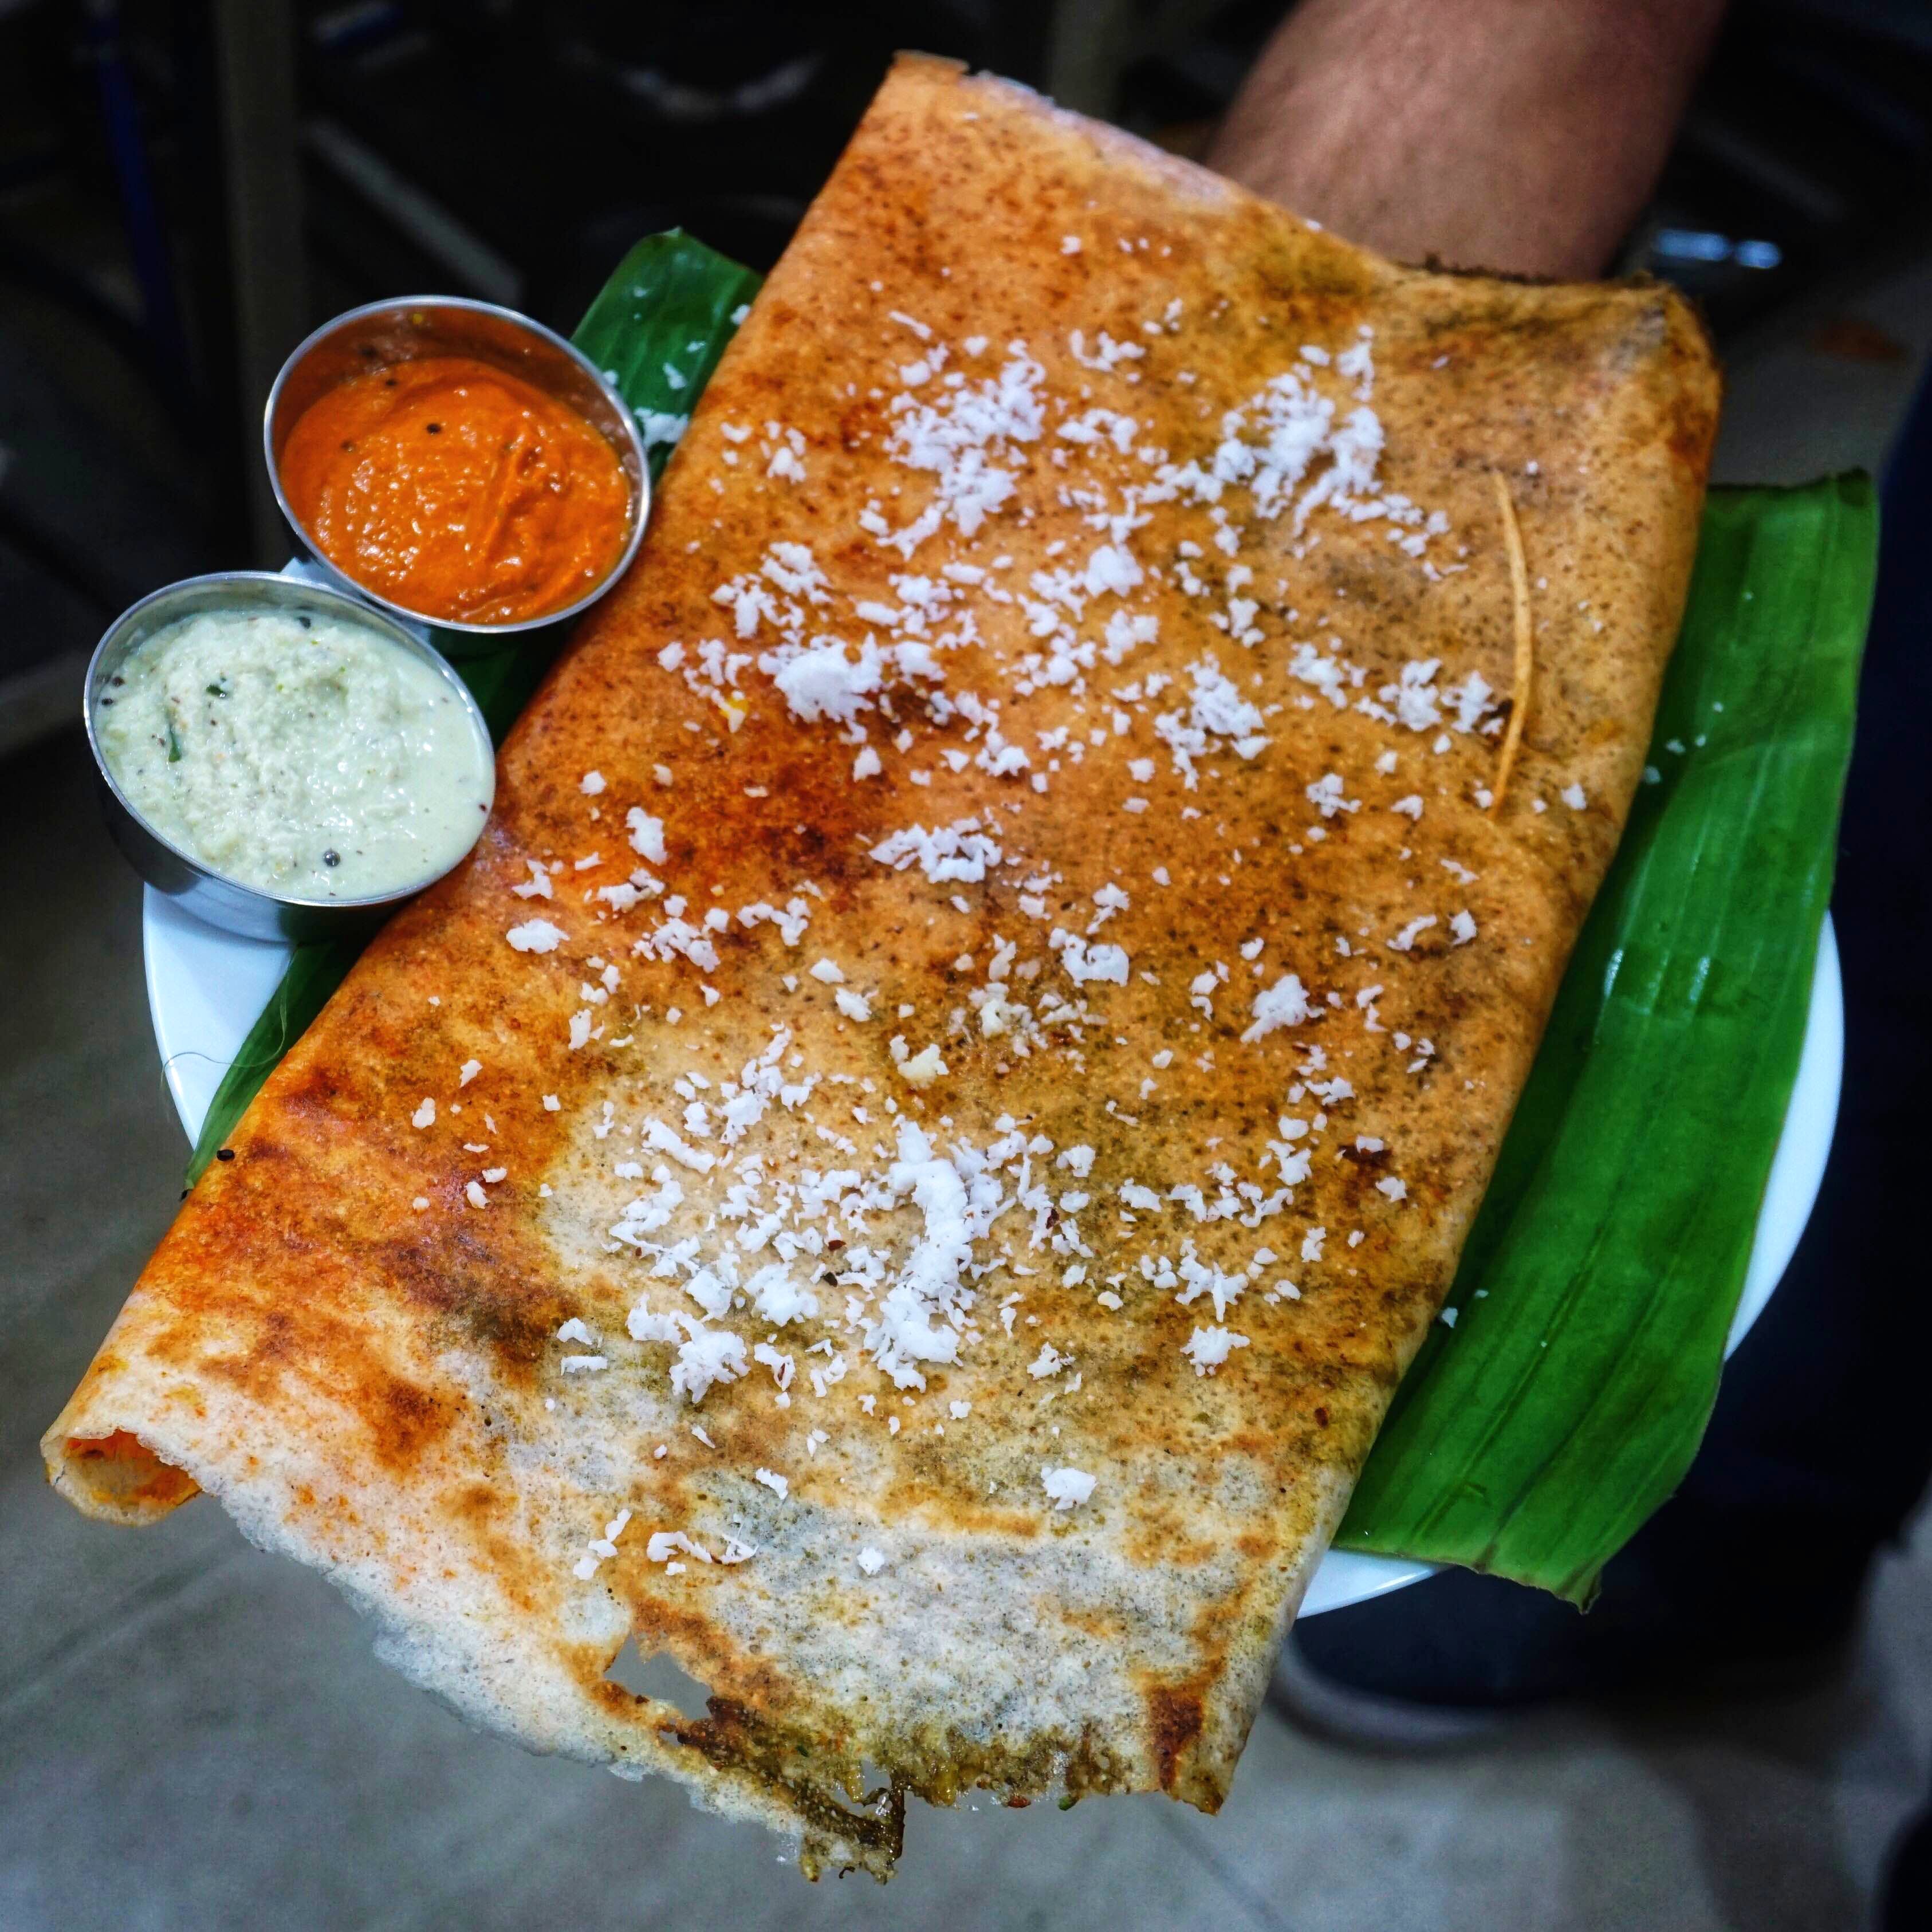 Dish,Food,Cuisine,Dosa,Ingredient,Indian cuisine,Fried food,Chimichanga,Produce,Baked goods